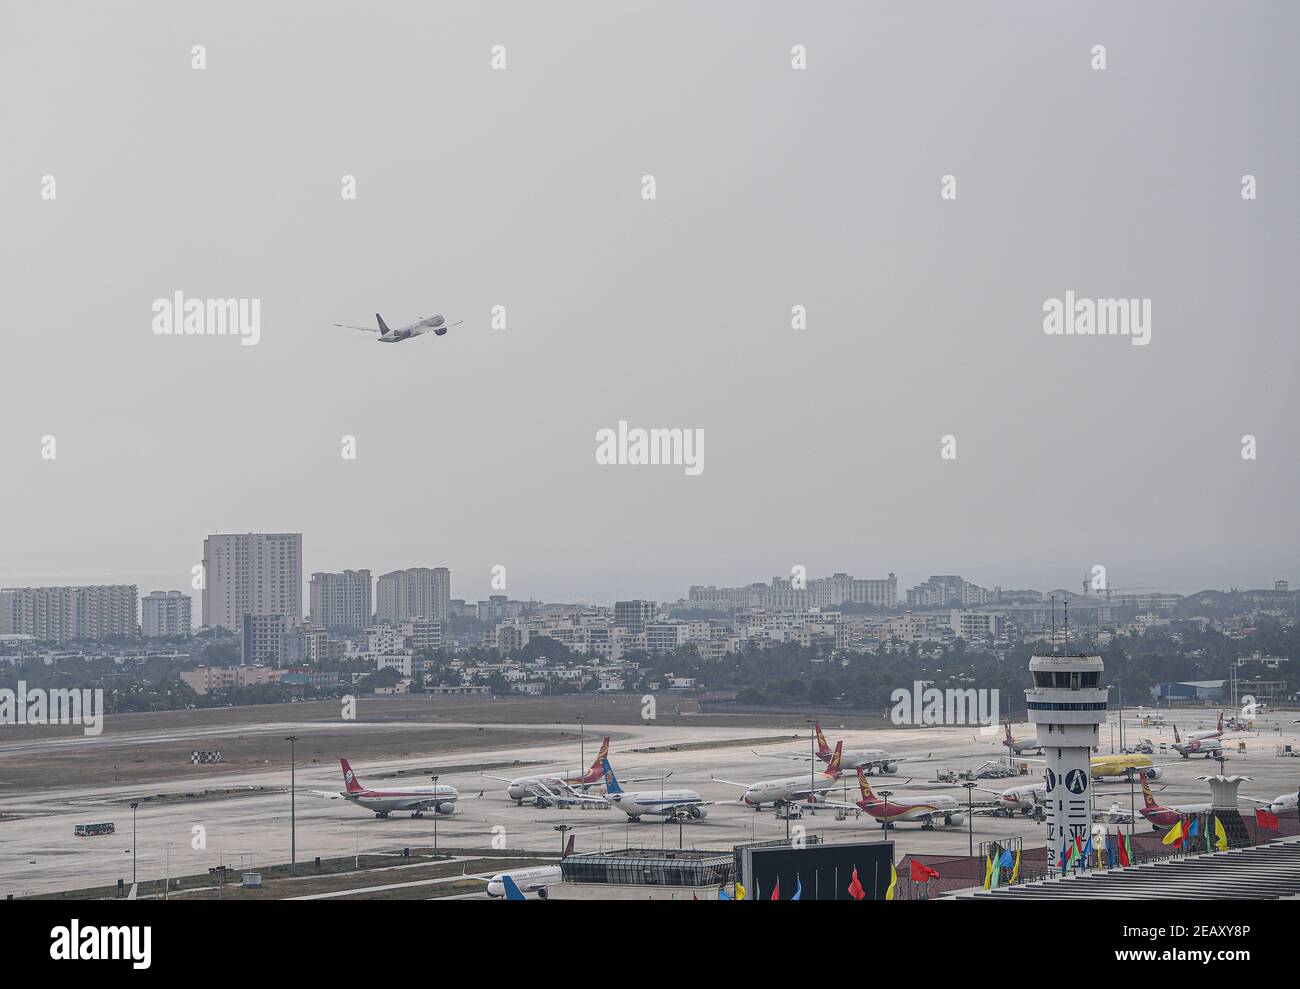 (210211) -- SANYA, Feb. 11, 2021 (Xinhua) -- A plane takes off at the Sanya Phoenix International Airport in Sanya, south China's Hainan Province, Jan. 28, 2021. Hong Yuan, 29, is an air traffic controller at Sanya Air Traffic Control Tower. As an air traffic controller, Hong is responsible for navigating the air traffic, guiding pilots during takeoff and landing, and monitoring the planes as they travel through the skies. This job requires high attentiveness. Staff members are accordingly supposed to take a break every two hours to recover from the intense work. During last year, the a Stock Photo